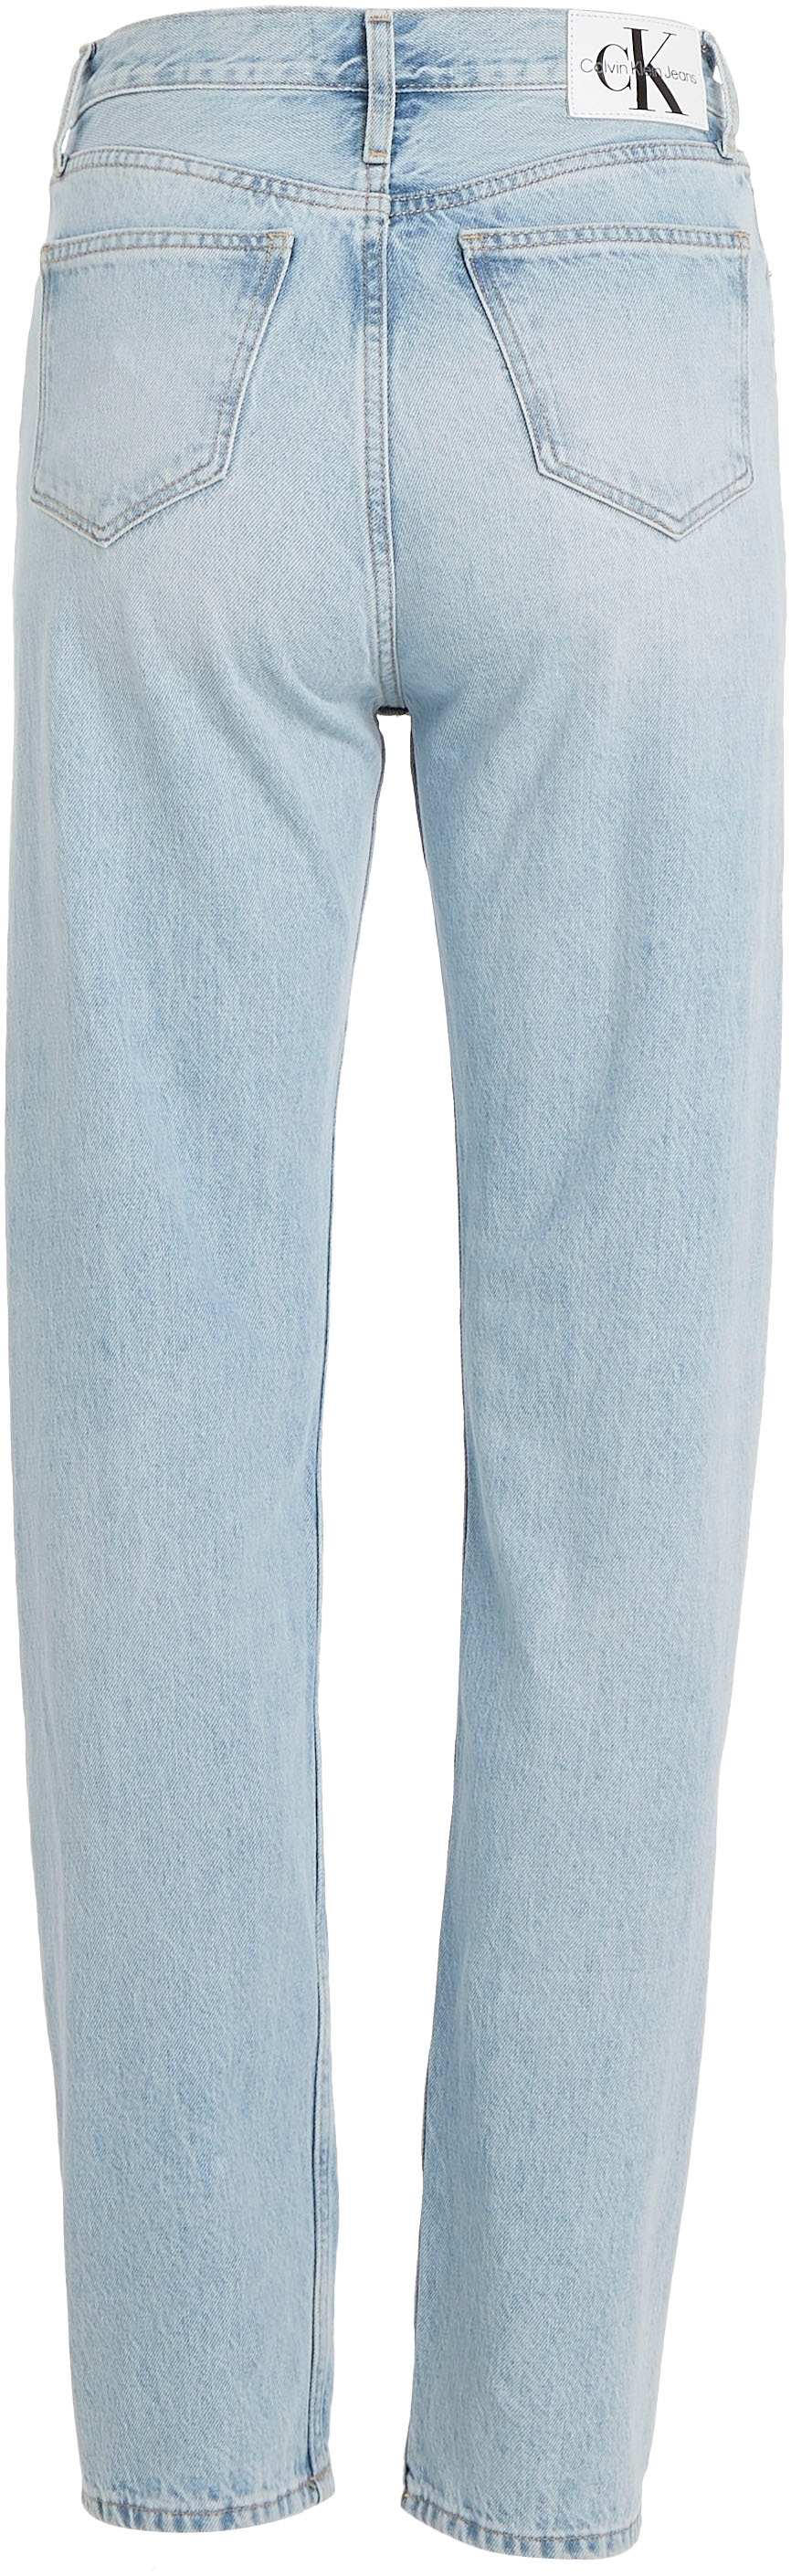 RISE Klein bei Jeans ♕ STRAIGHT«, Calvin 5-Pocket-Style im »HIGH Straight-Jeans